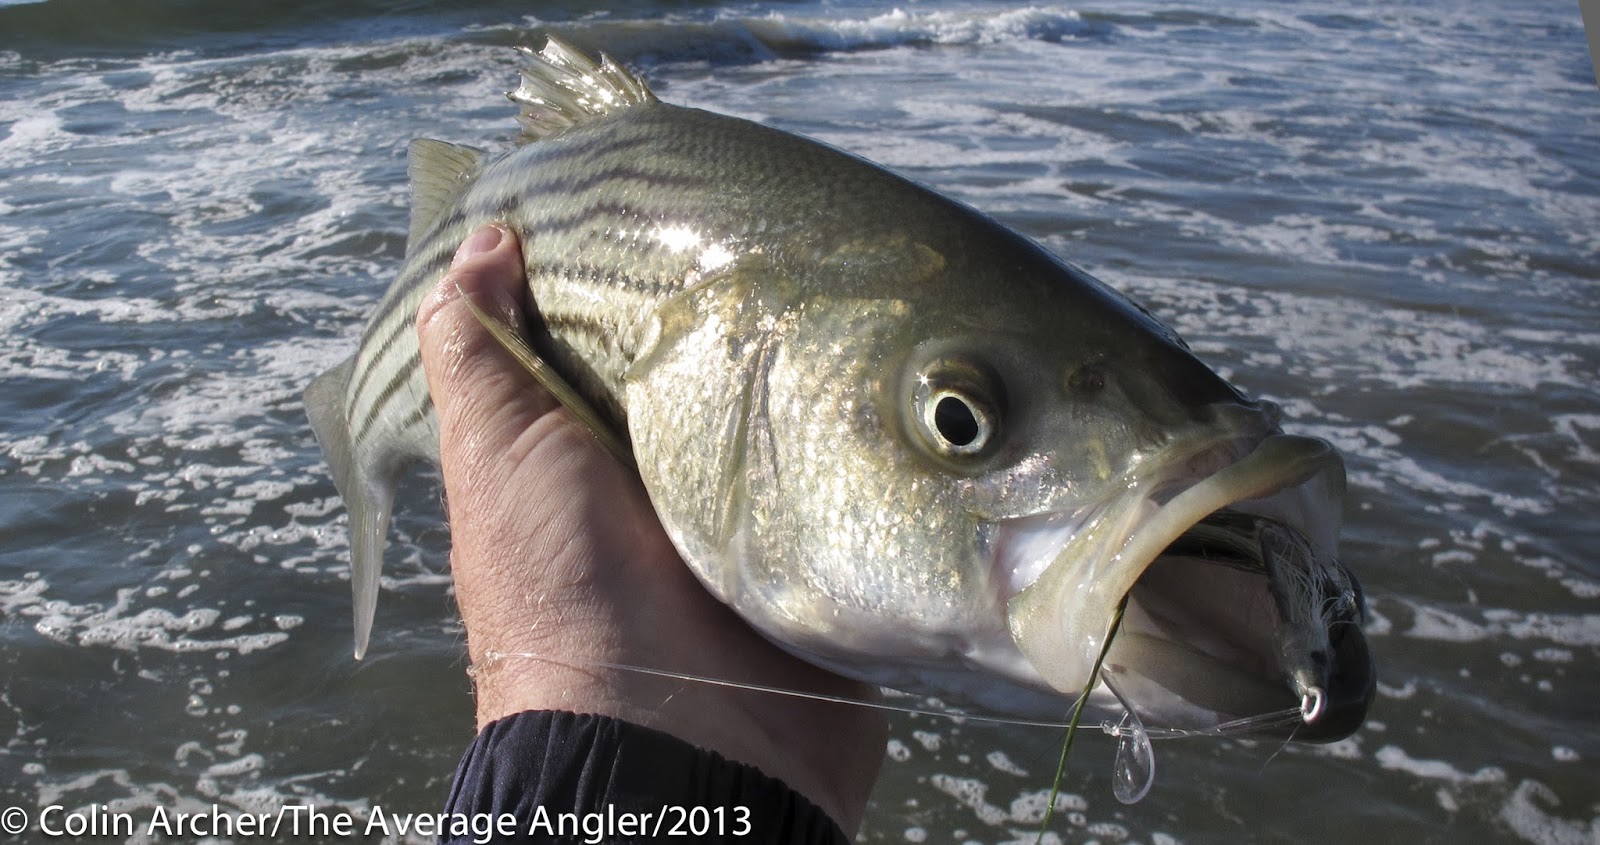 The Average Angler: 12.01.16 Time for them sand eels..maybe